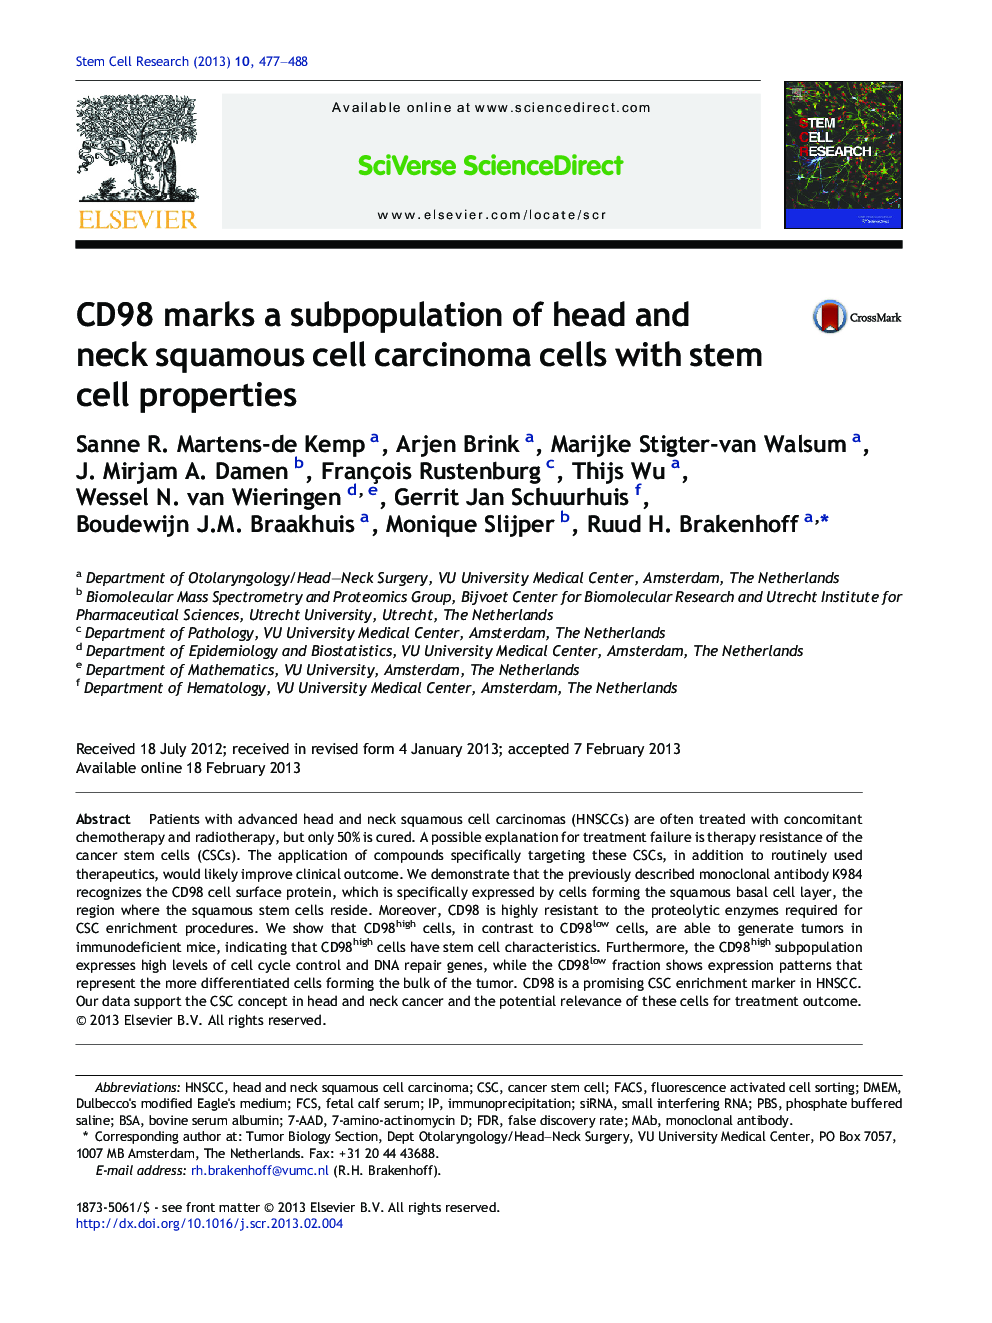 CD98 marks a subpopulation of head and neck squamous cell carcinoma cells with stem cell properties